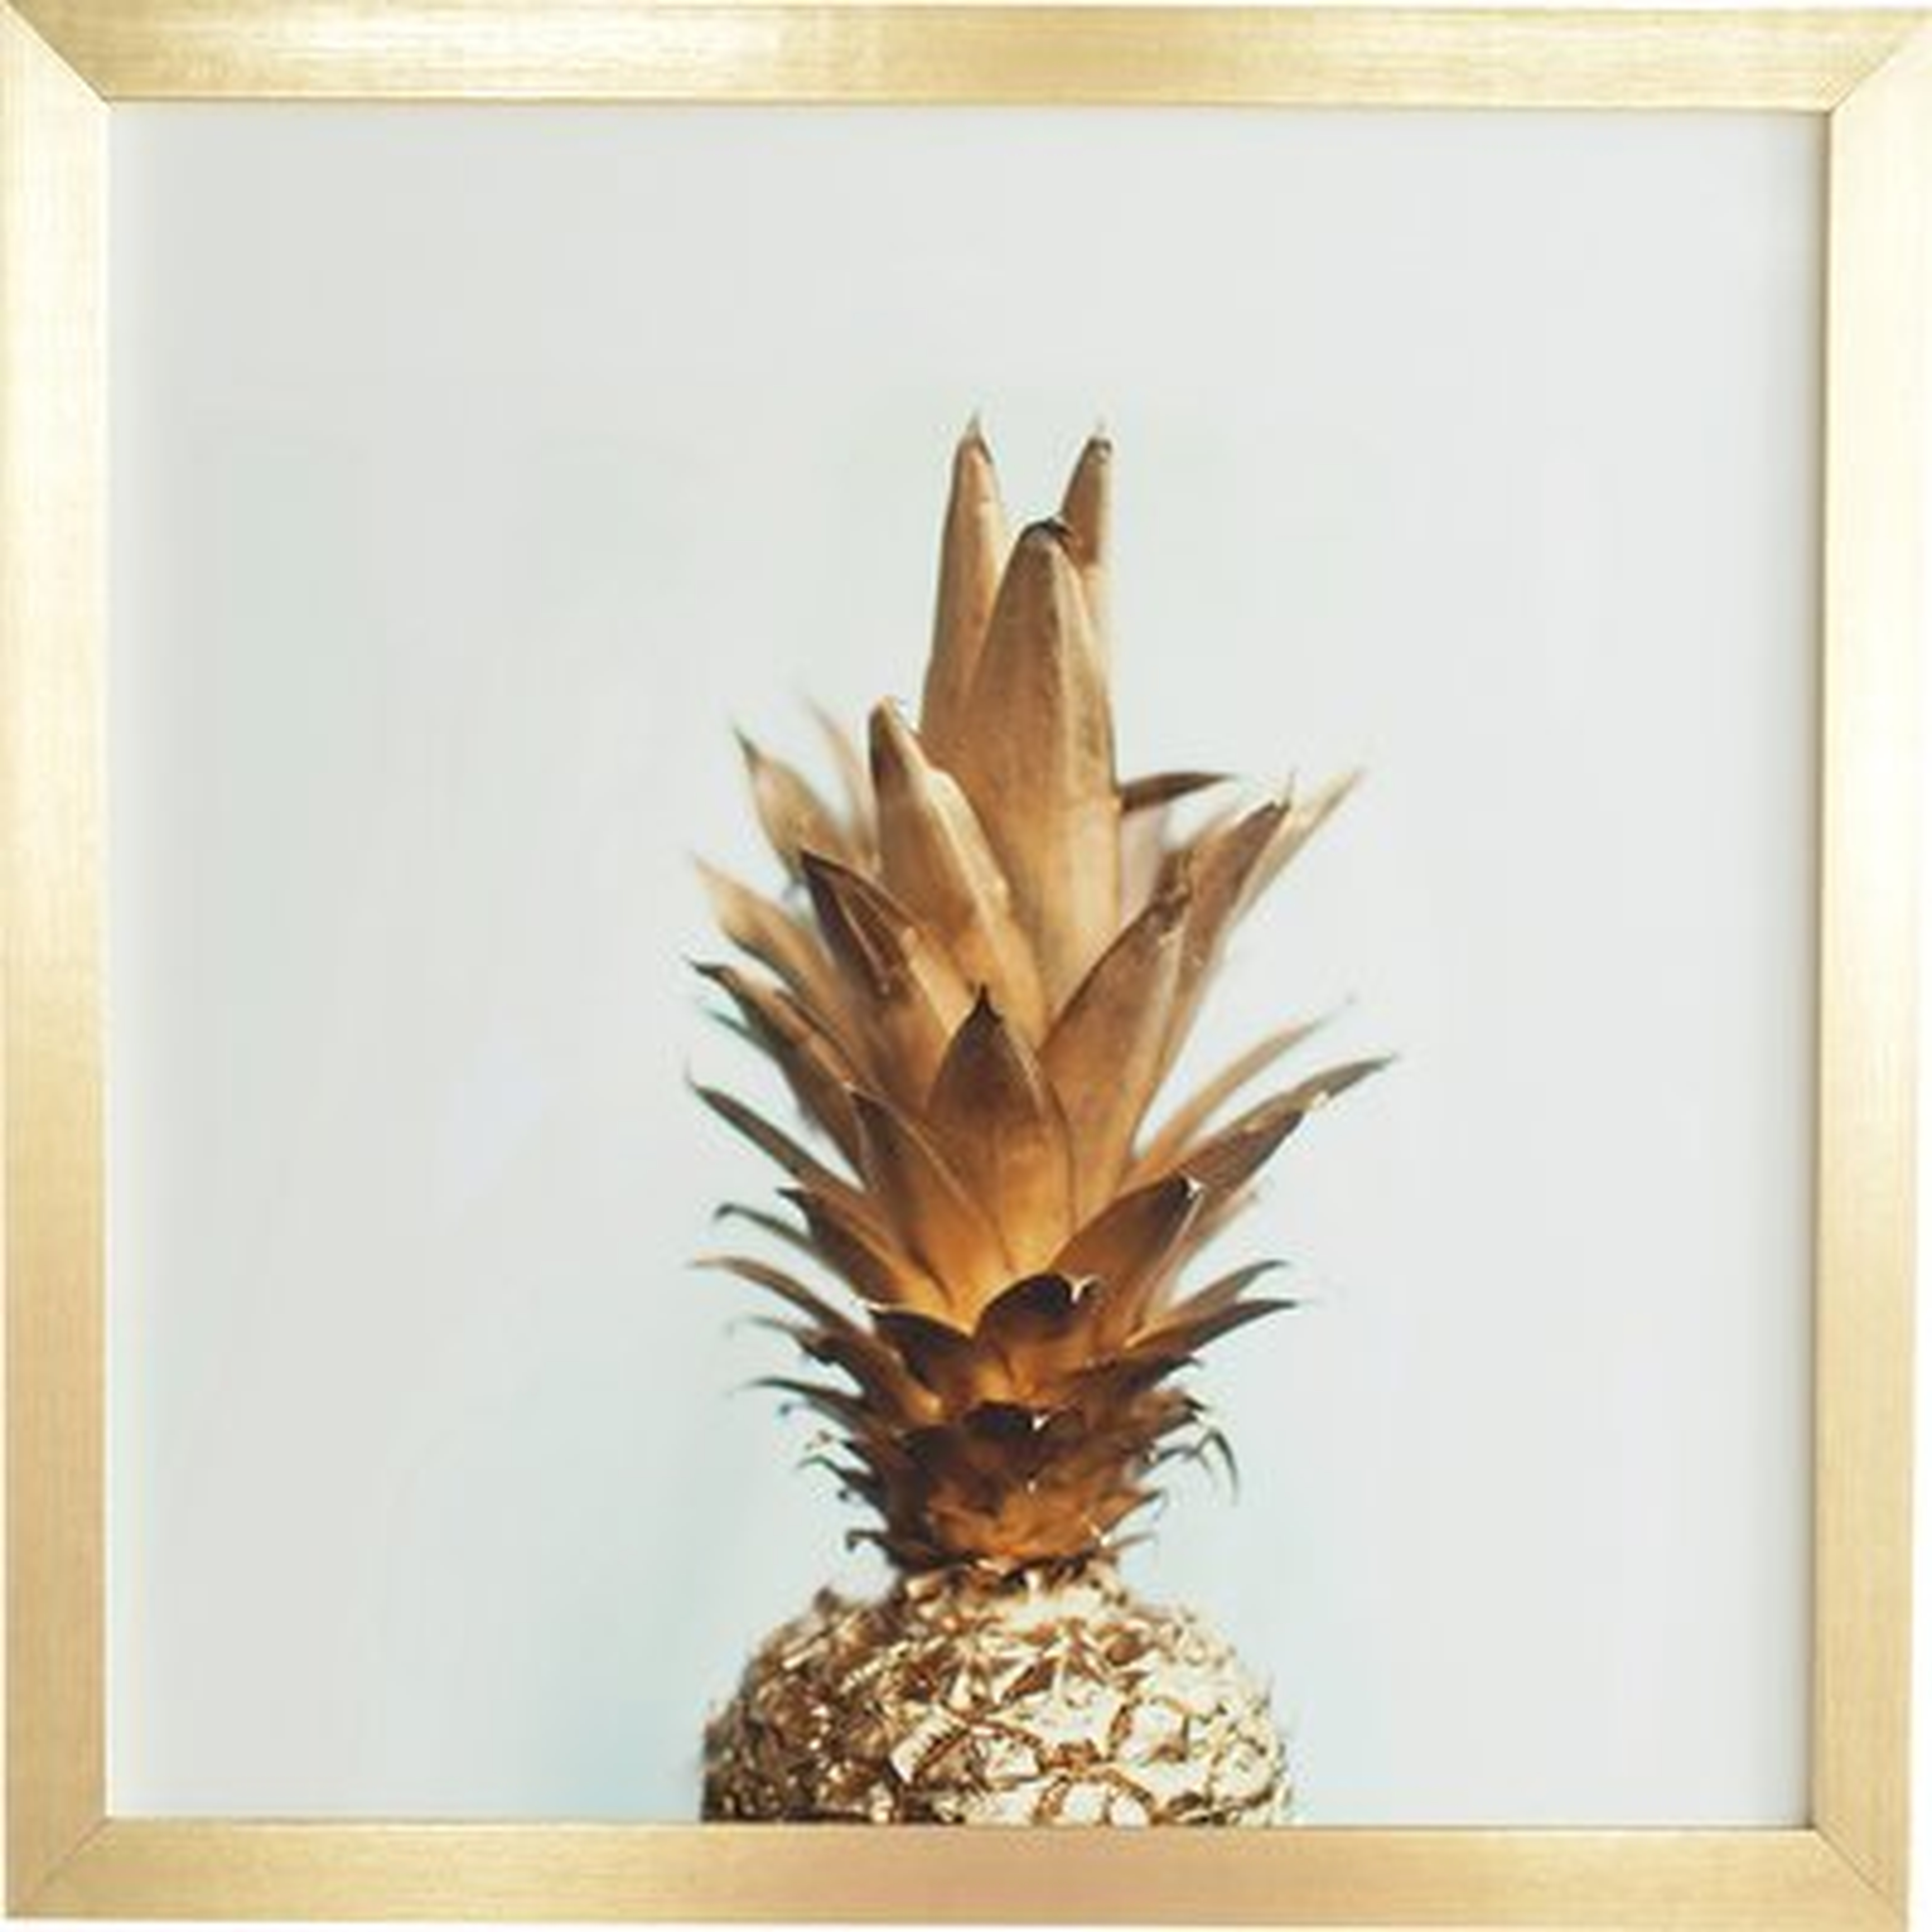 The Gold Pineapple' Framed Photographic Print on Wood by Chelsea Victoria - Picture Frame Photograph Print on Wood - AllModern